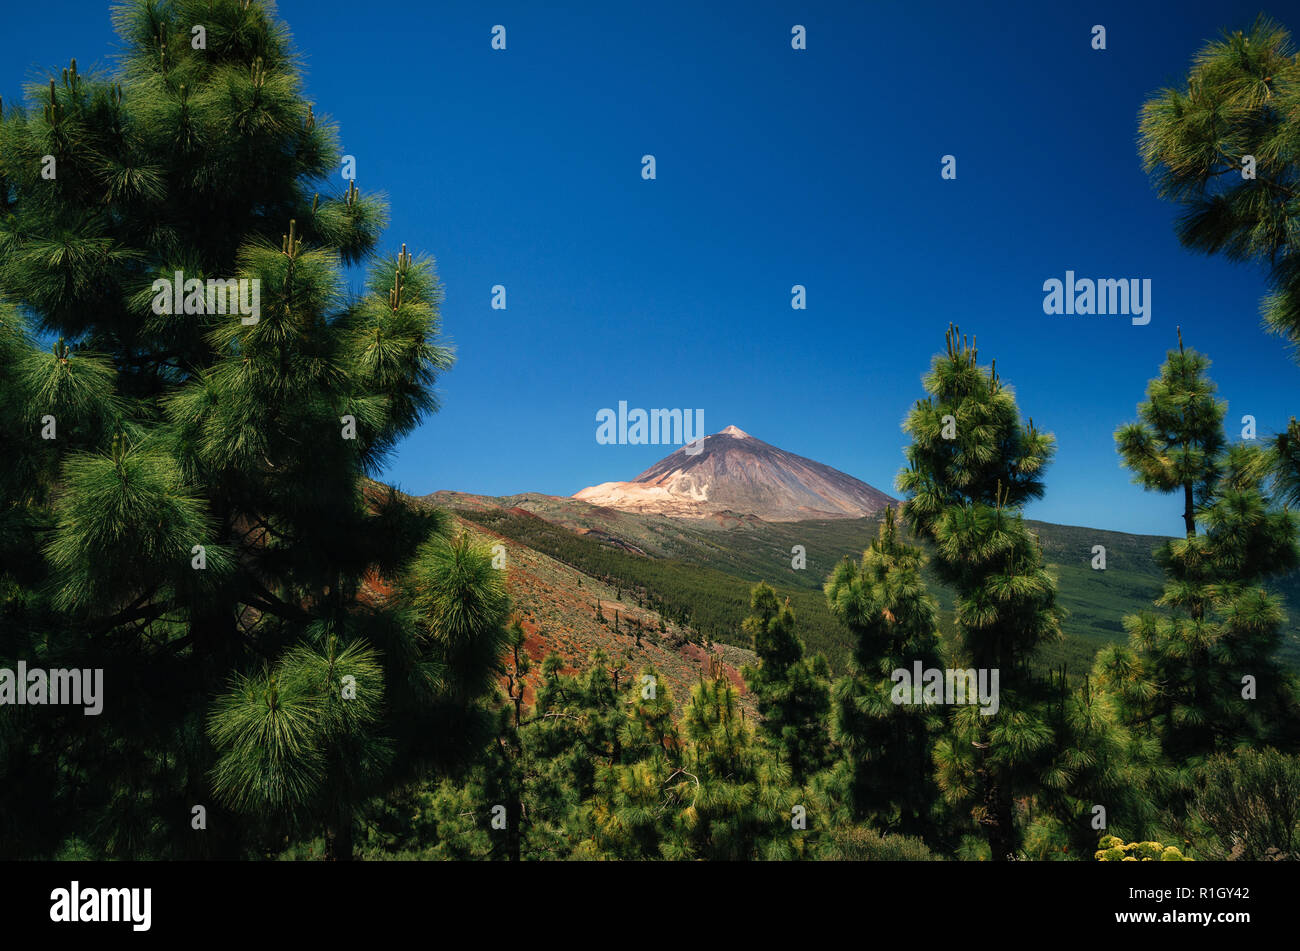 View of Teide volcano through rare thickets of coniferous trees, Tenerife, Spain. Stock Photo